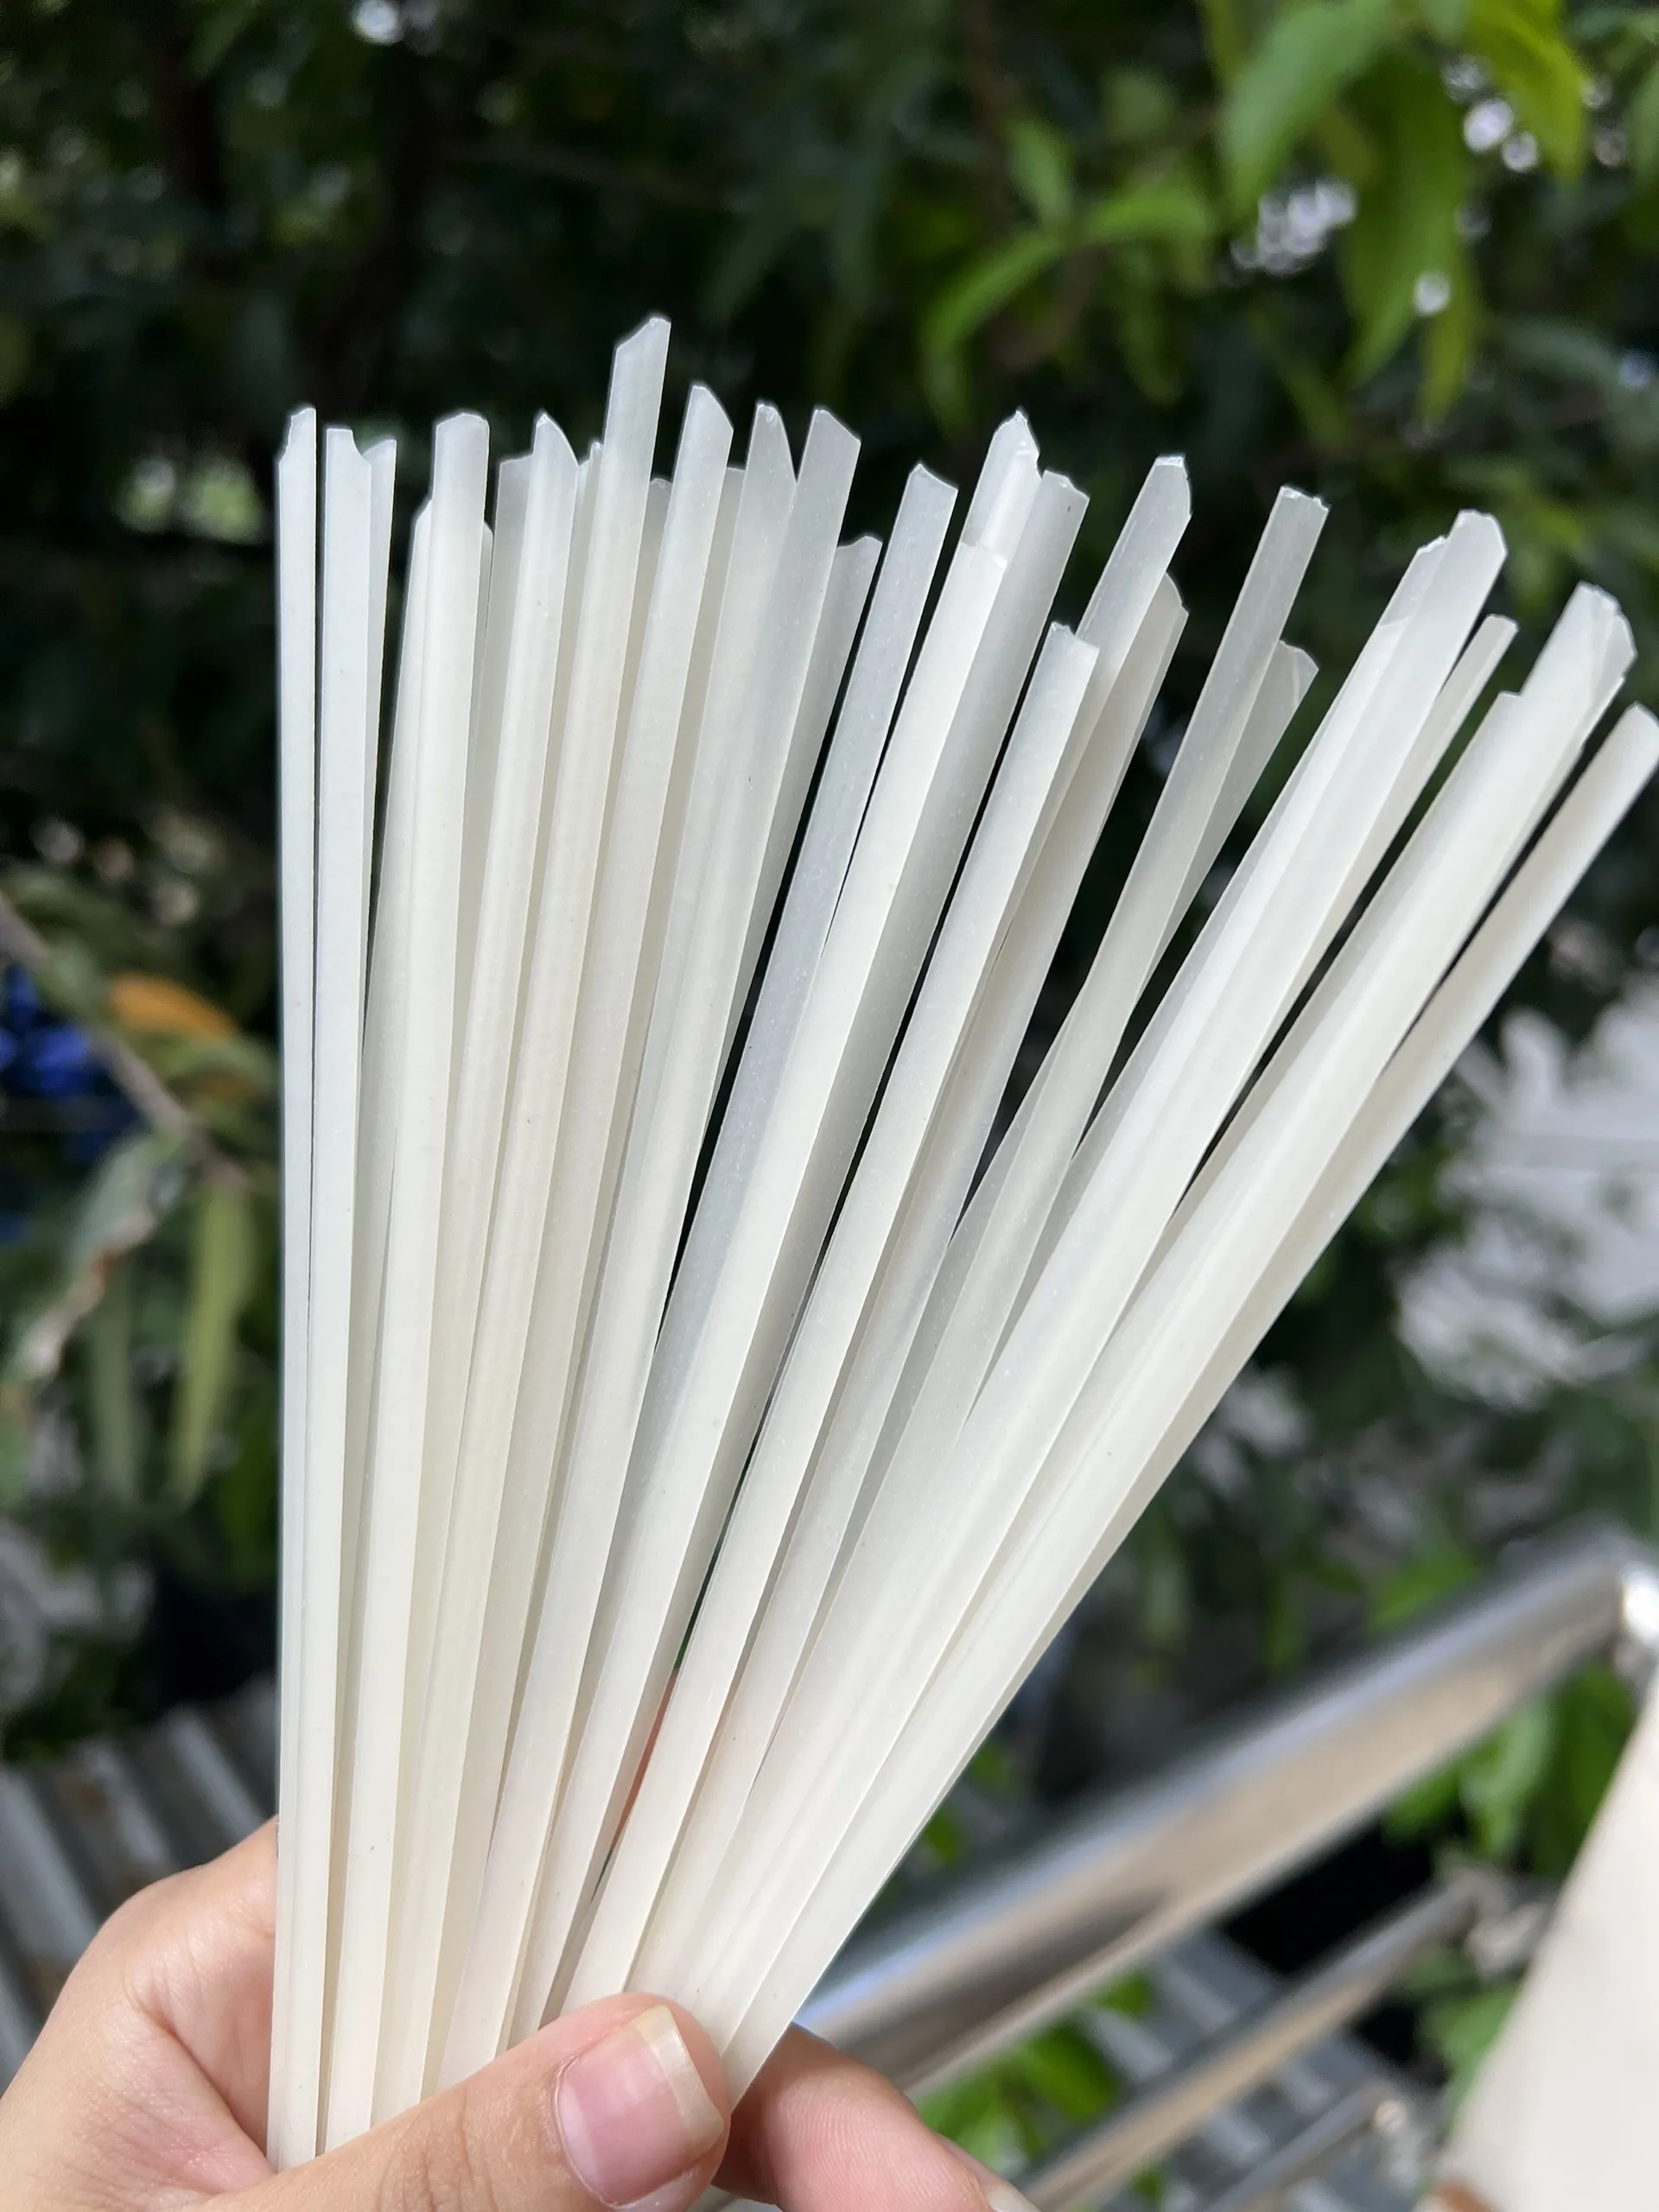 RICE STICK/STRAIGHT PHO NOODLE FOR PAD THAI FROM VIETNAM SUPPLIER CUSTOMIZED SIZE 2022